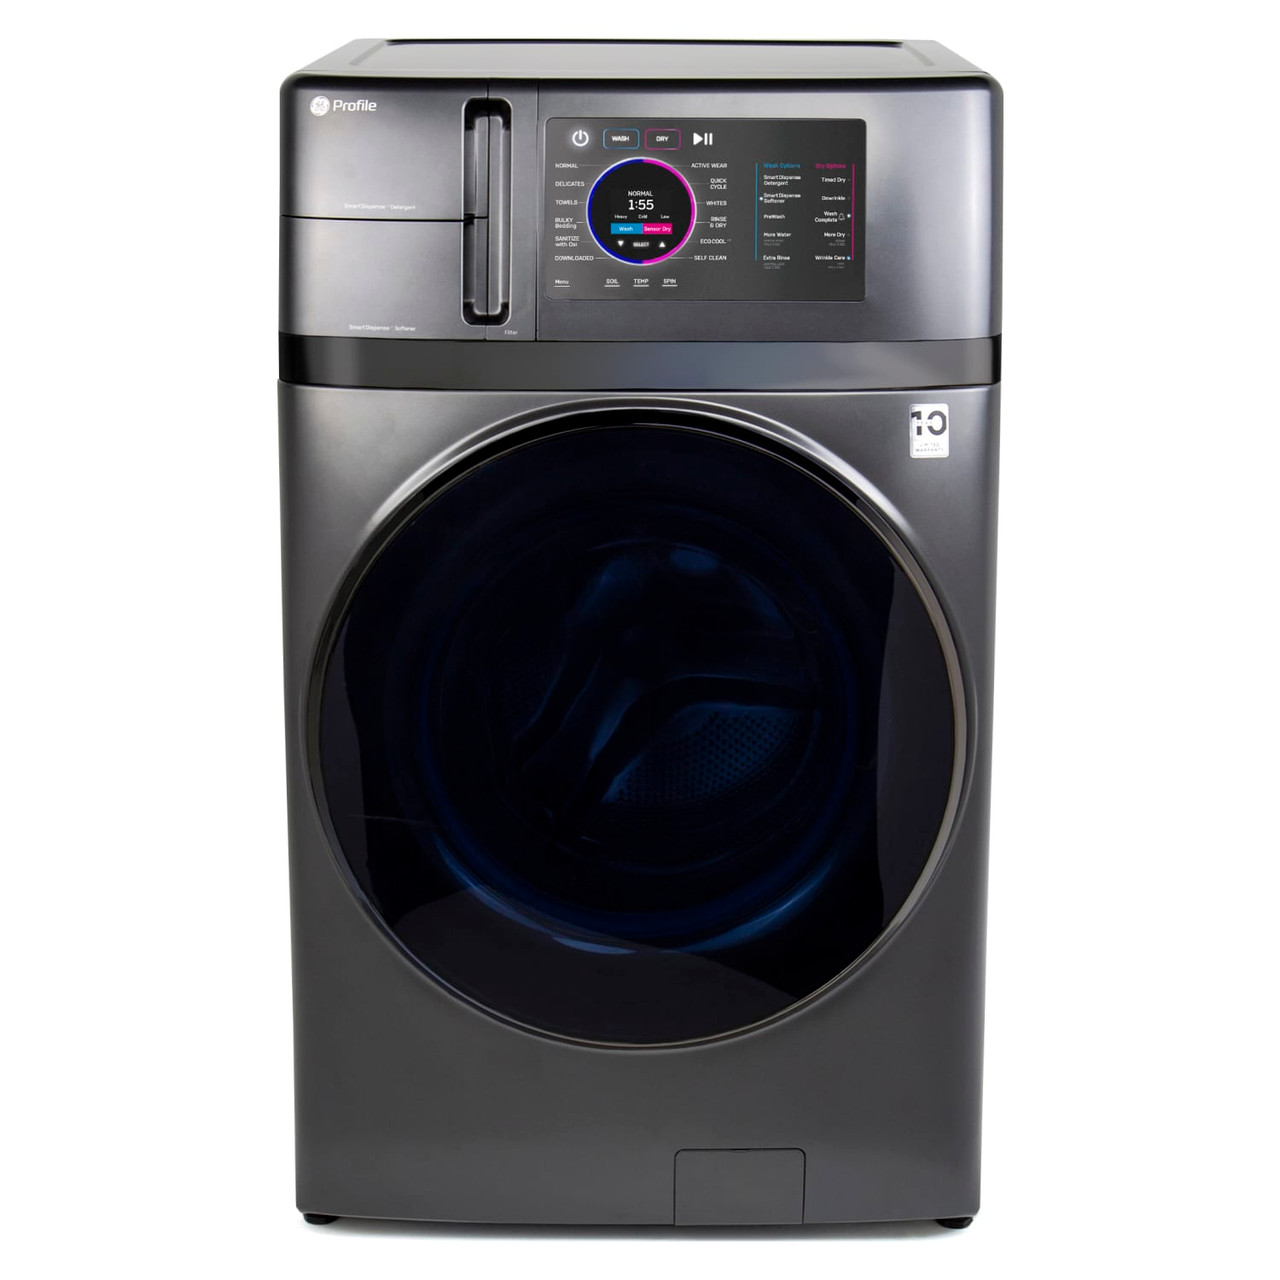 GE Profile - UltraFast 4.8 cu. ft. Large Capacity All-in-One Washer/Dryer Combo with Ventless Heat Pump Technology - Carbon Graphite - PFQ97HSPVDS